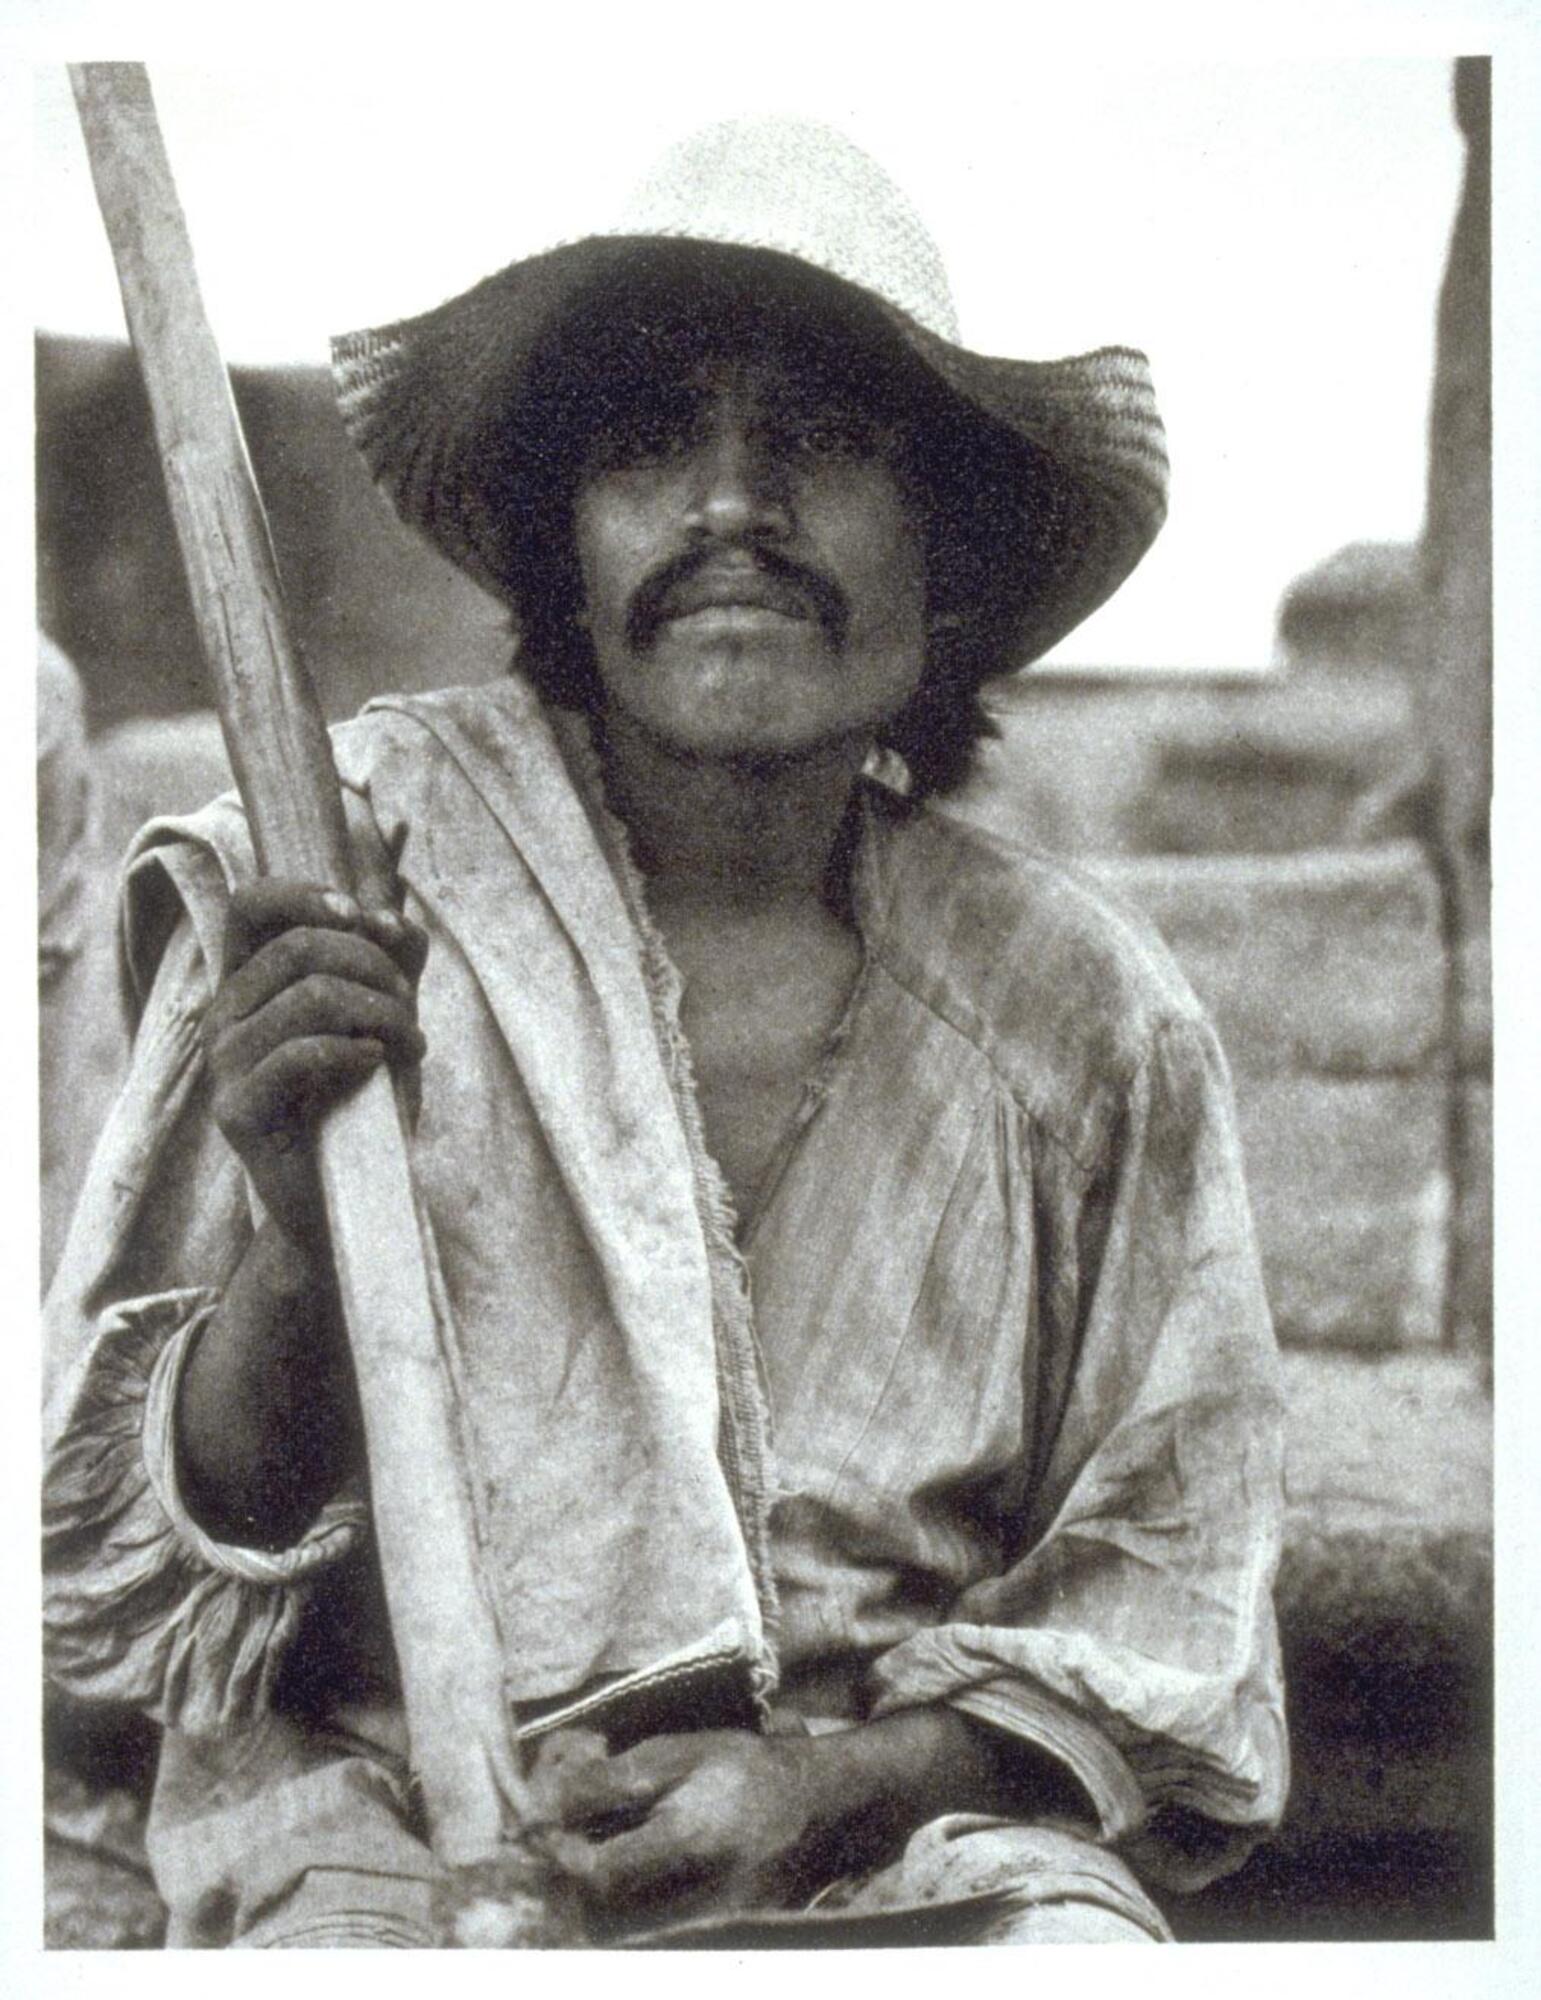 Portrait of a man holding a hoe, wearing soiled campesino clothing. He sits in front of a stone wall, looking out of frame. 